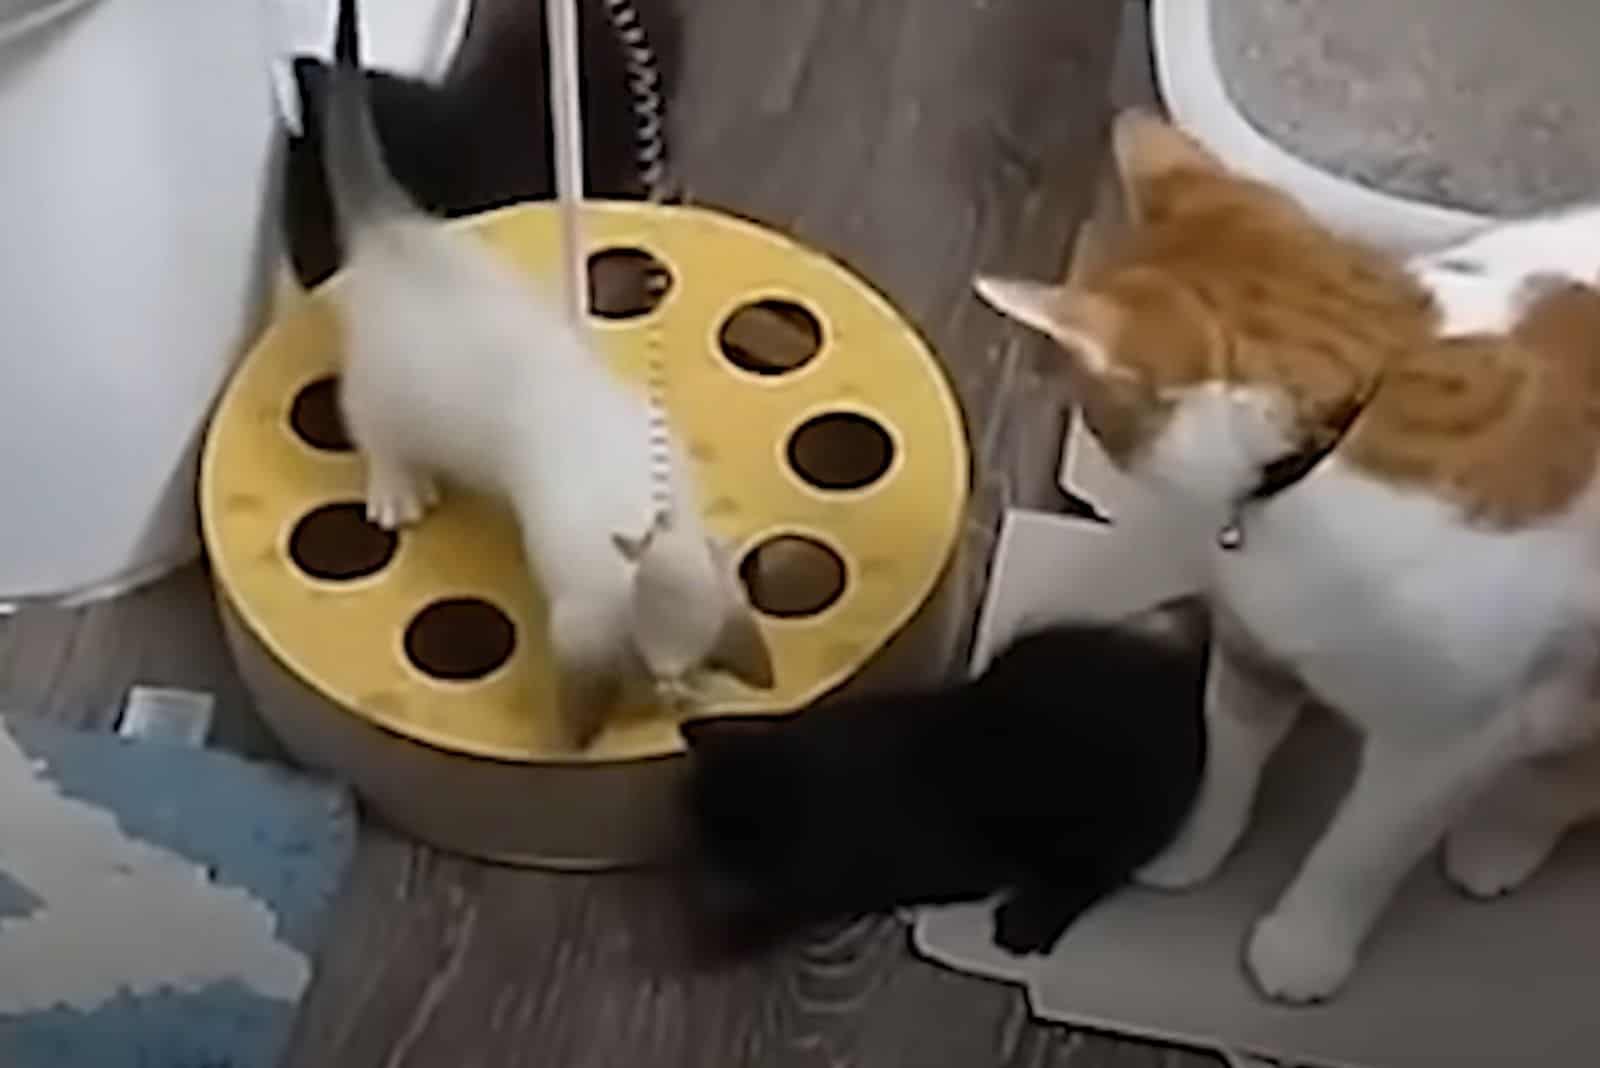 the cat looks after the kittens while they are playing